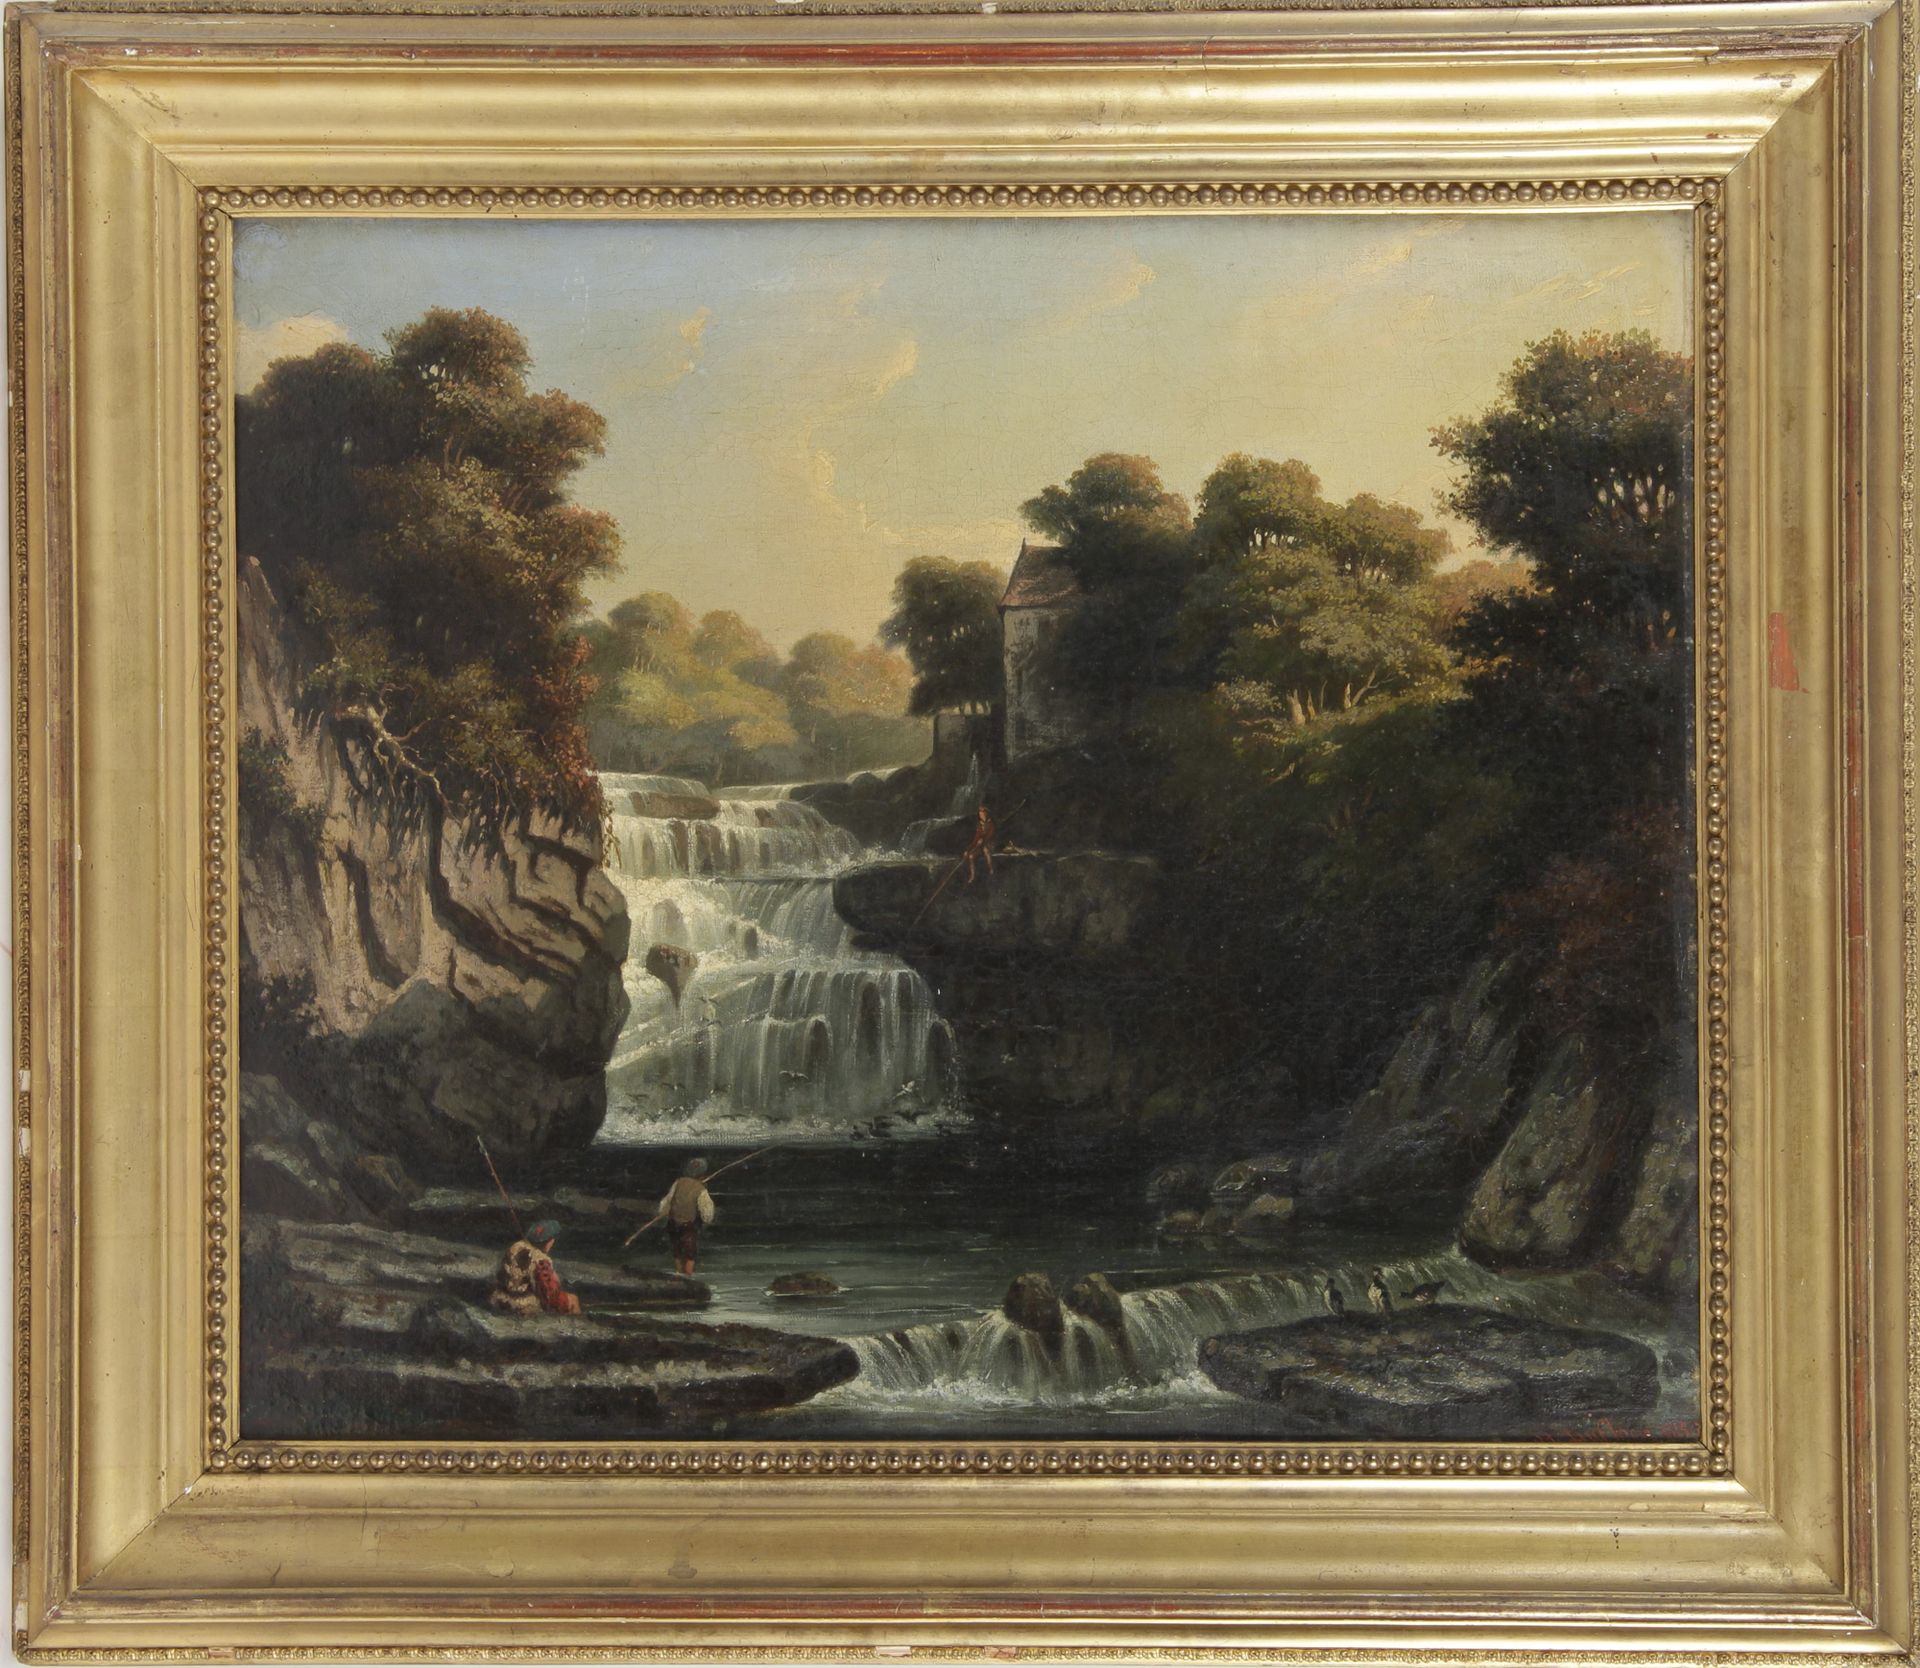 Null H. DUFLOCQ, French school of the 19th century

"Landscape of waterfalls", o&hellip;